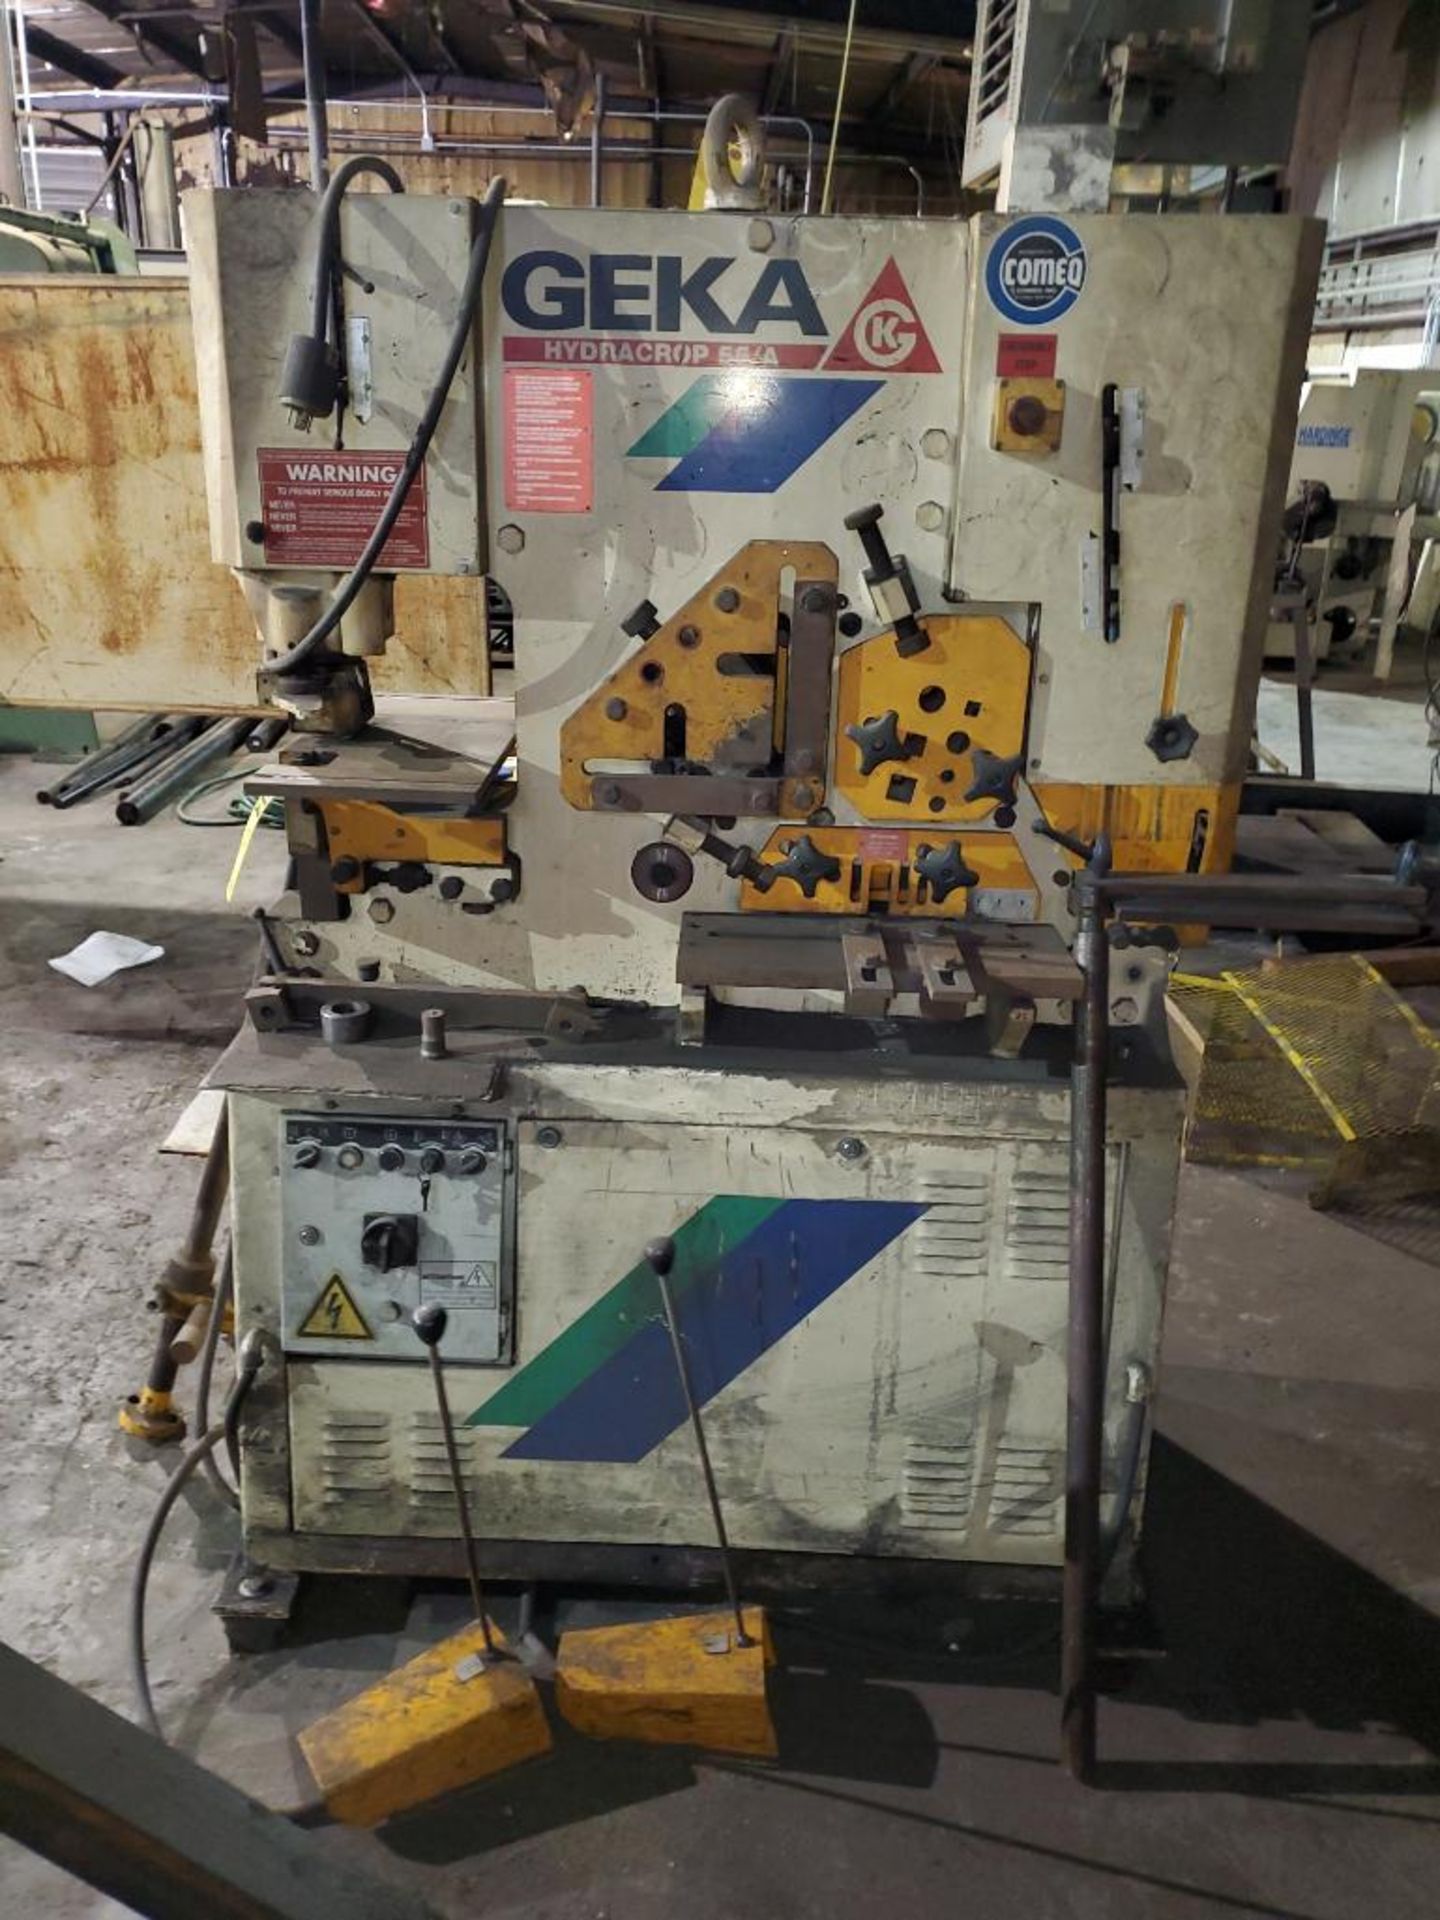 GEKA HYDRACROP 55/A IRONWORKER, DUAL FOOTSWITCH, BAR FEED EXTENSION, PUNCH BLOCK, RACK OF IRONWORKER - Image 15 of 15